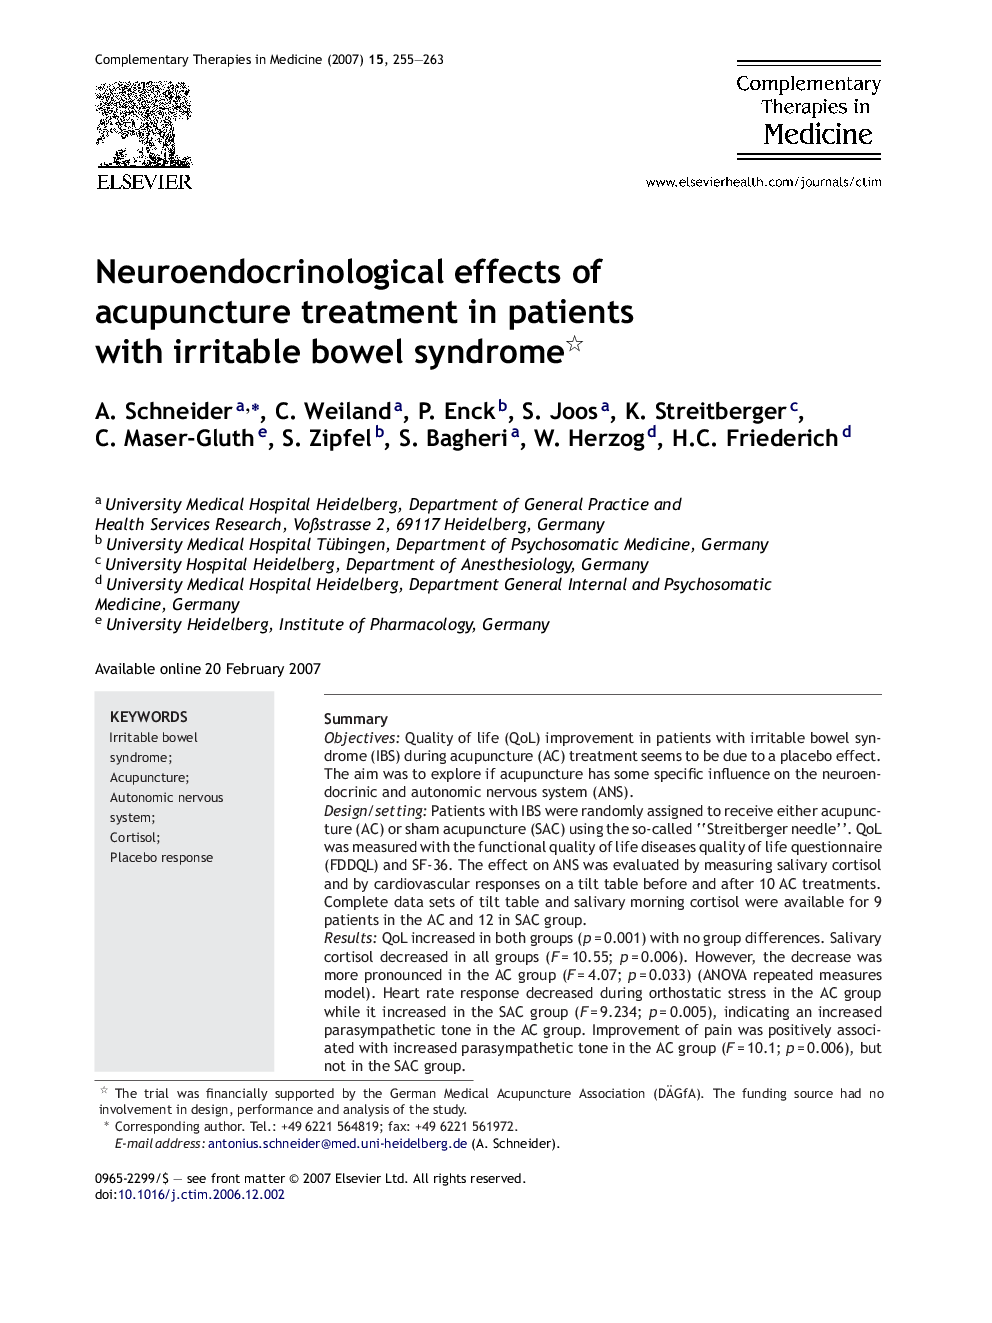 Neuroendocrinological effects of acupuncture treatment in patients with irritable bowel syndrome 